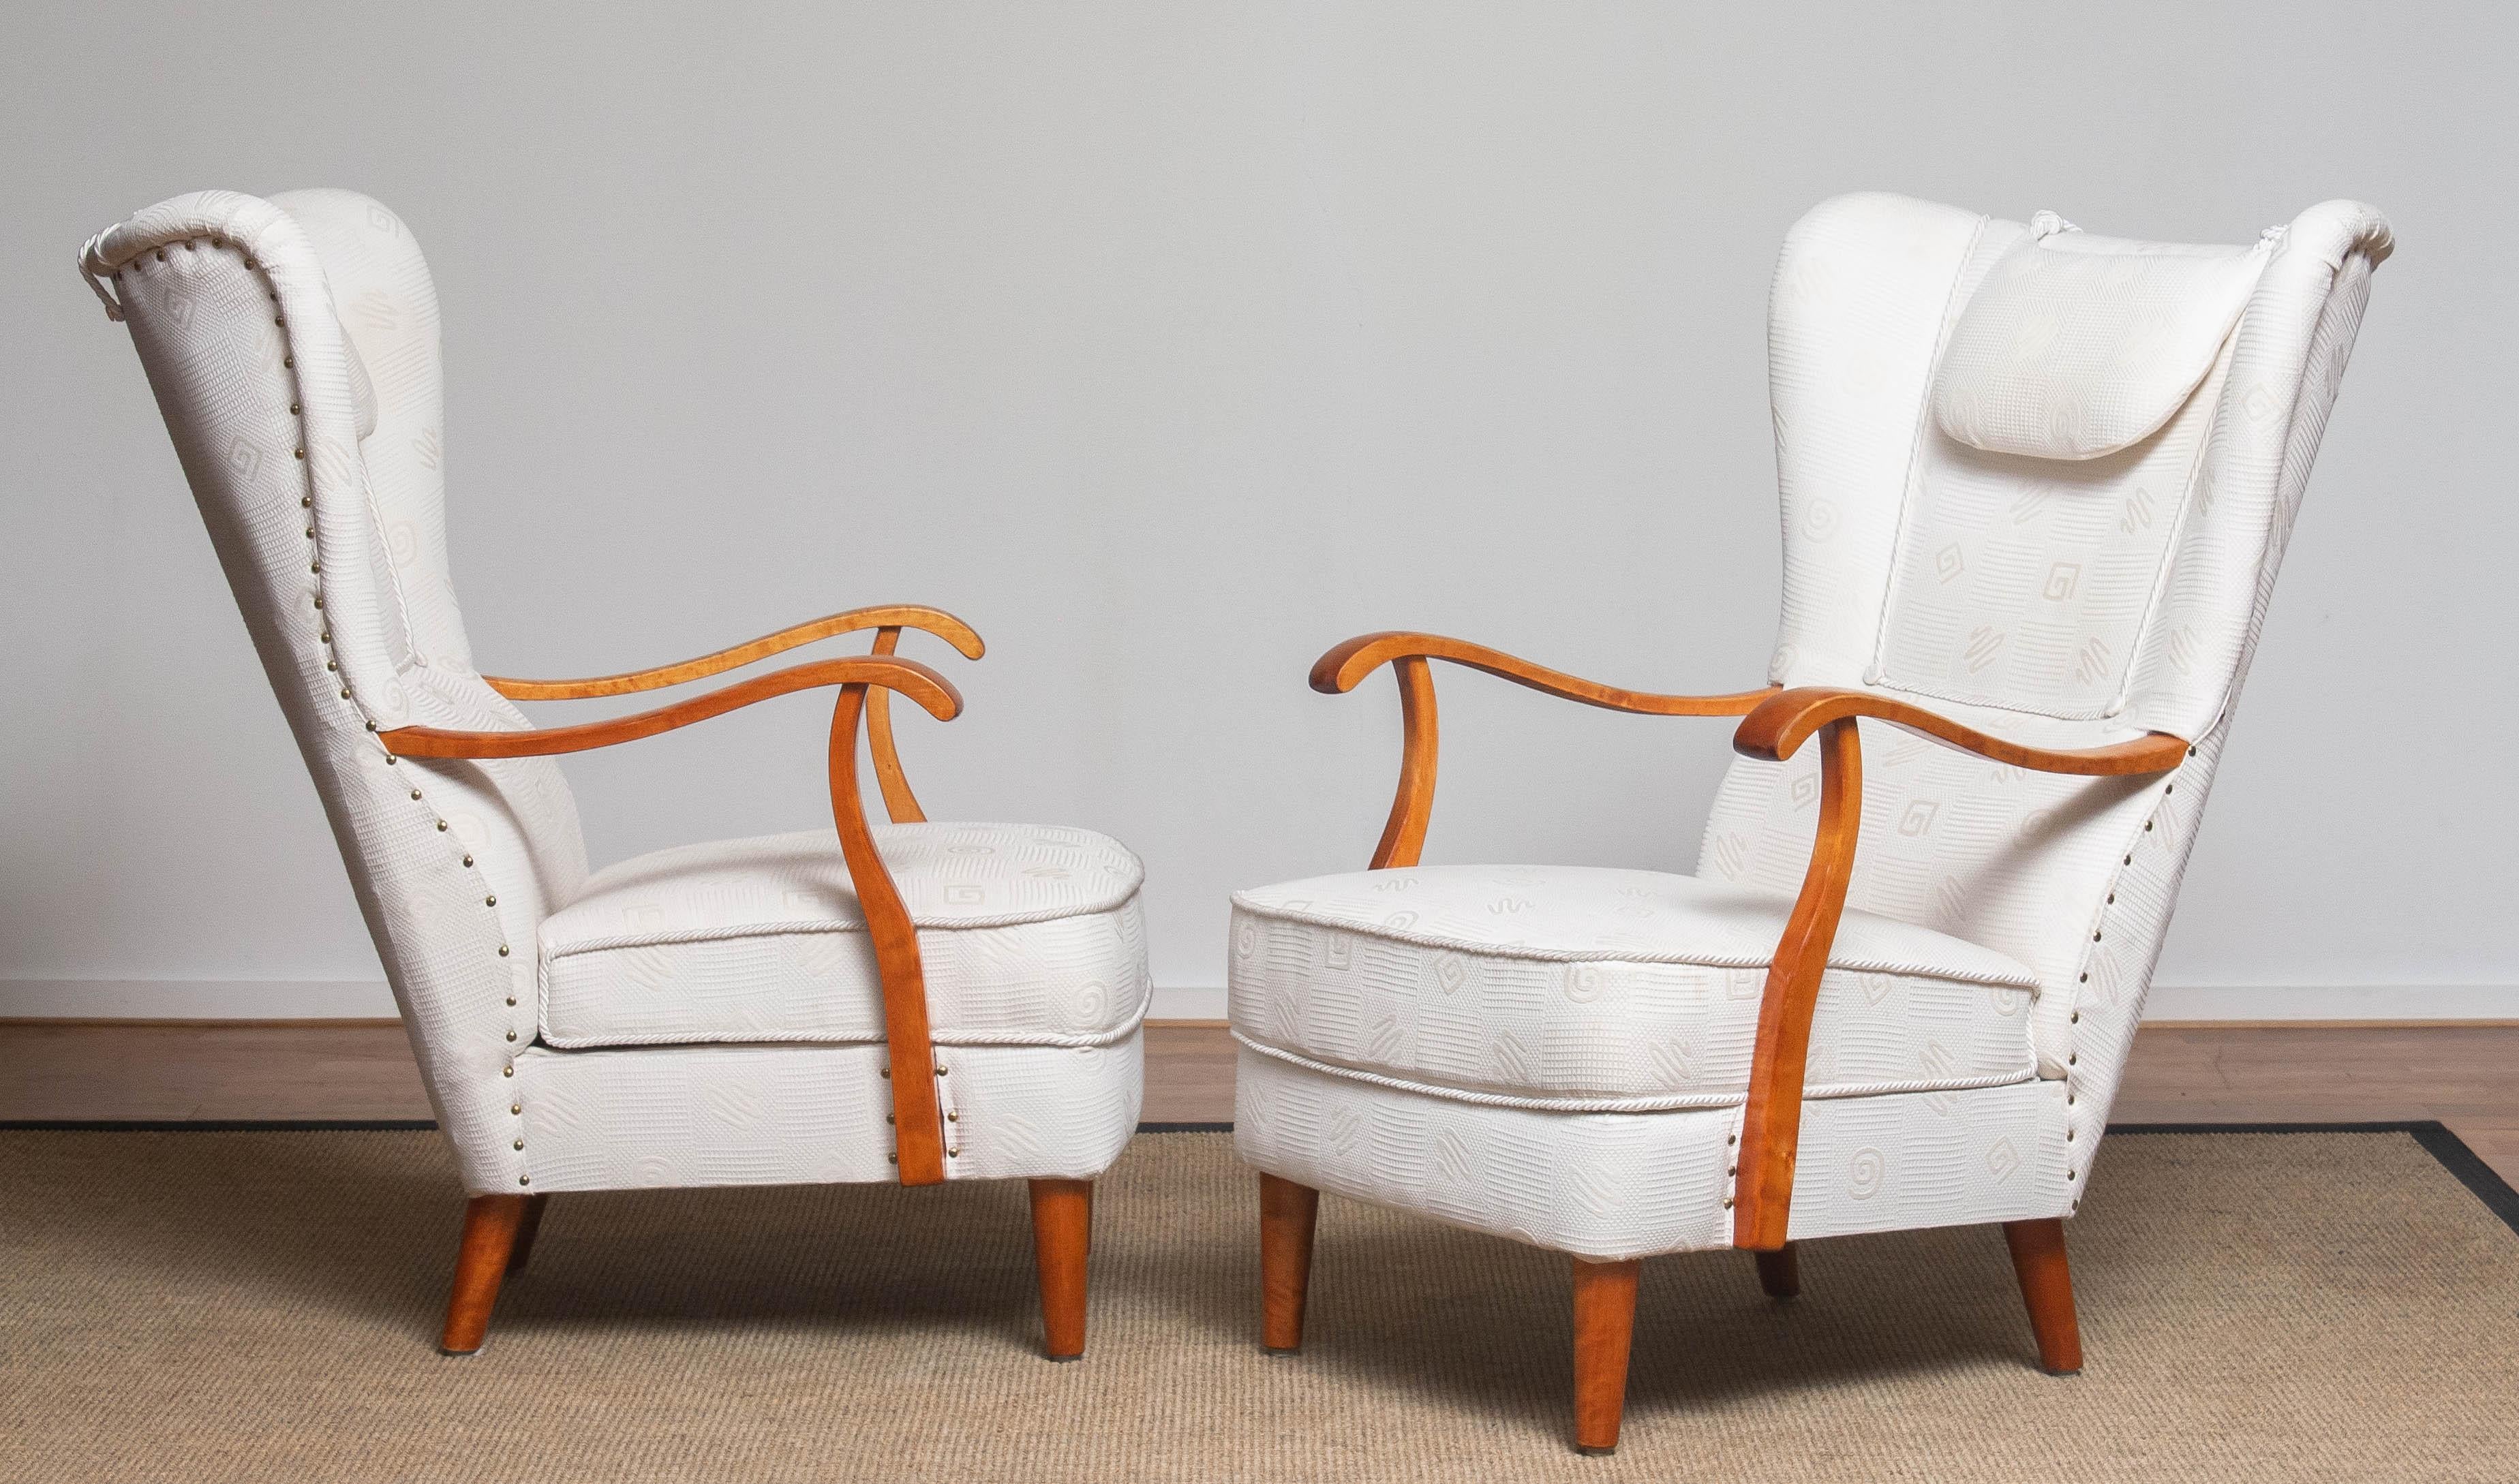 Beautiful and extremely rare set of two gentlemen wingback chairs made in the 1950's by Wilhelm Knoll for Knoll Malmö in Sweden. These chairs are in a later period (90's) reupholstered in a white jacquard fabric. Constructive the chairs are still